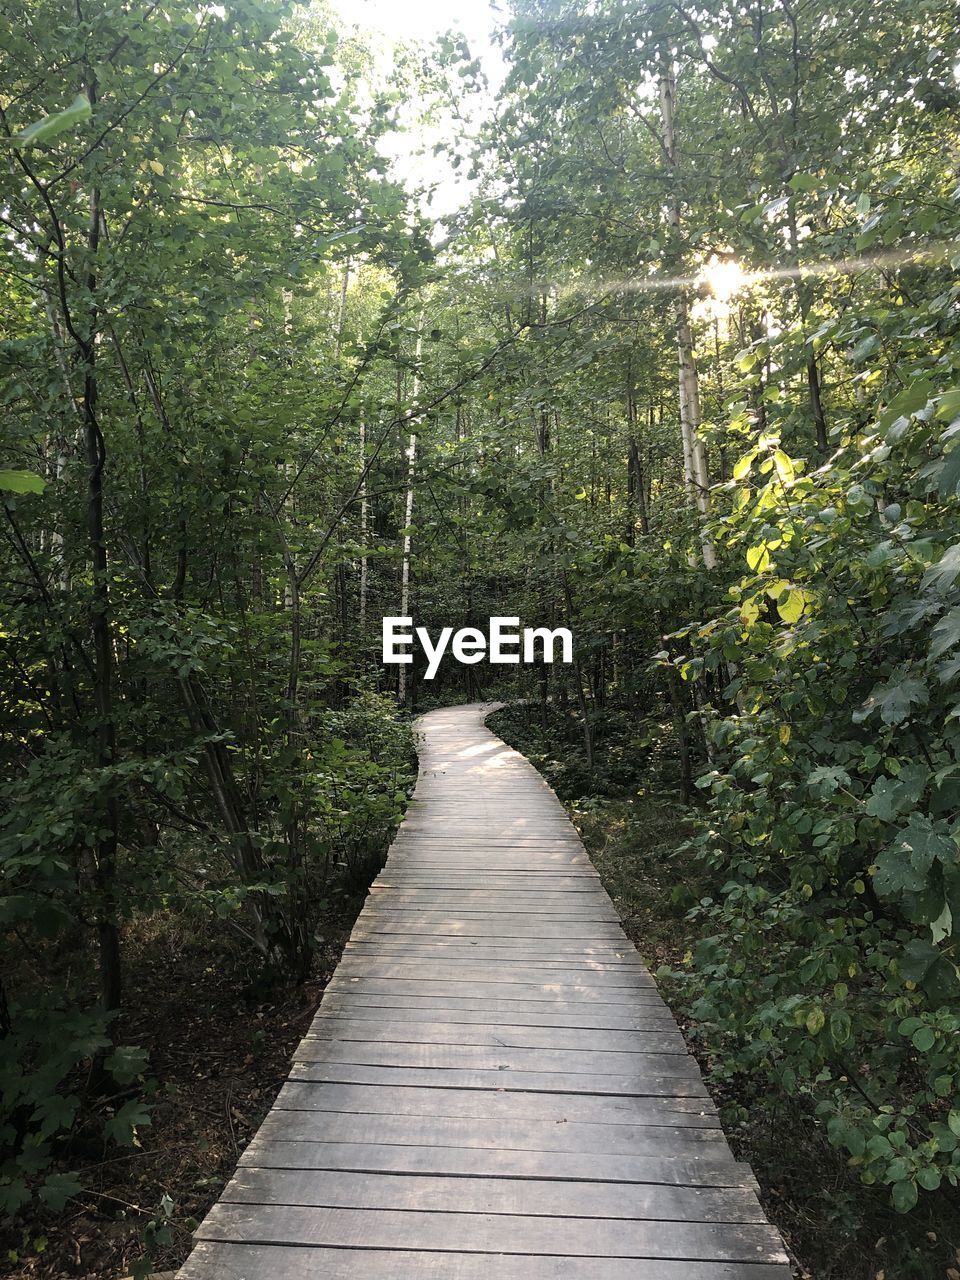 Boardwalk amidst trees in forest